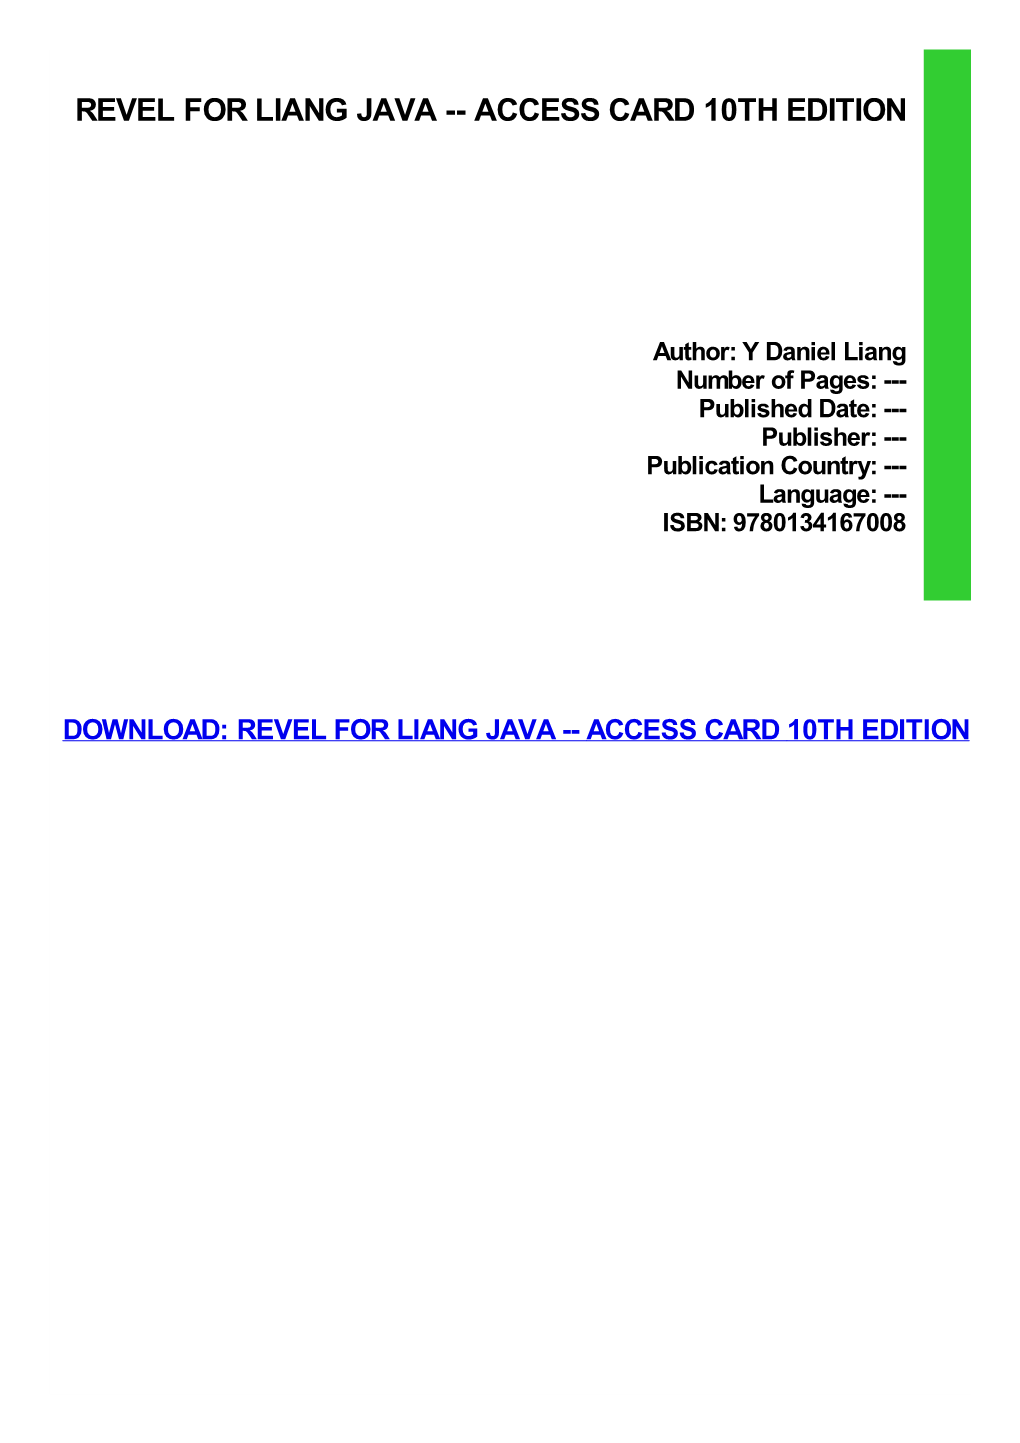 Revel for Liang Java -- Access Card 10Th Edition